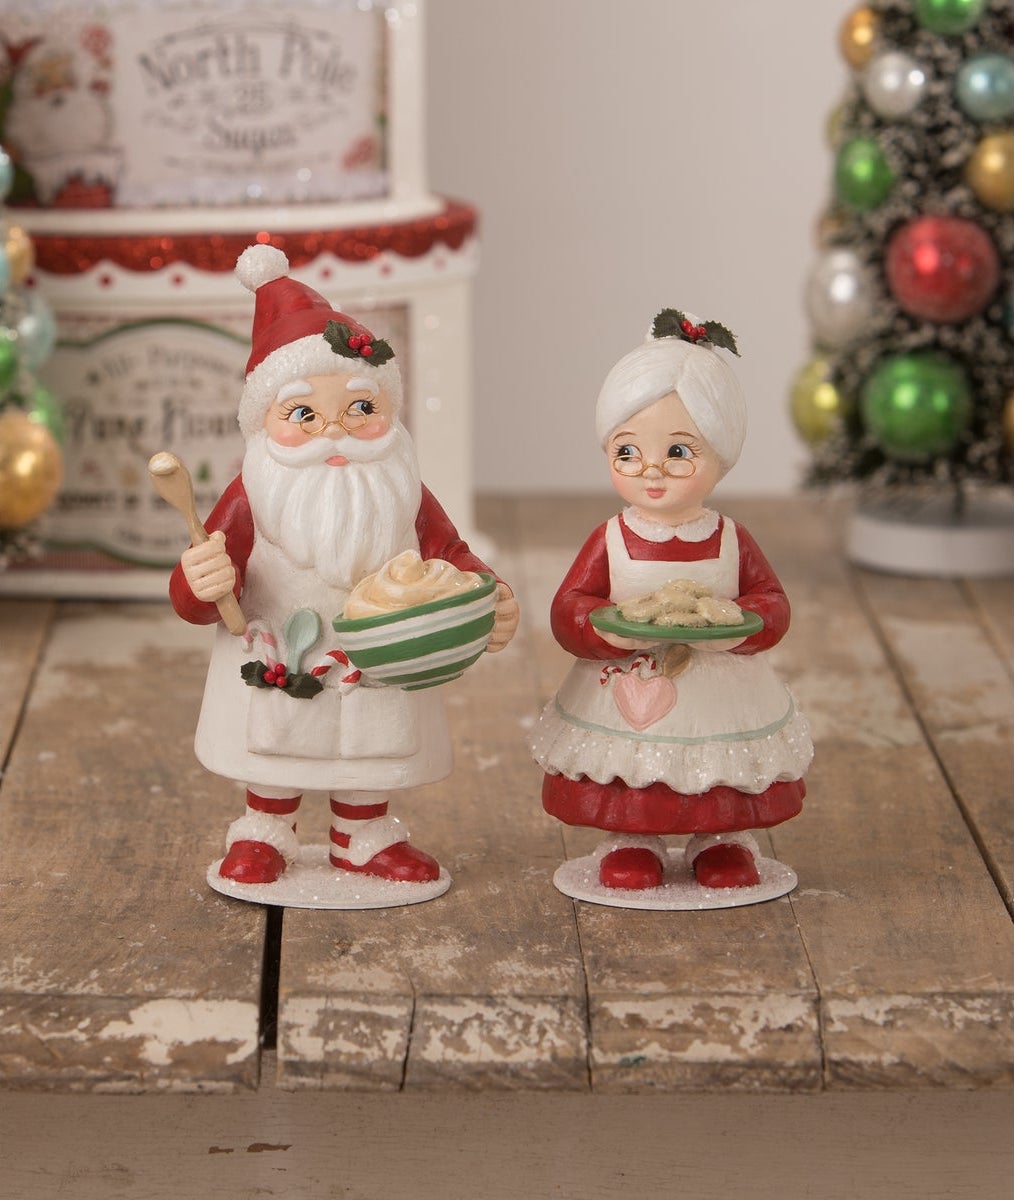 Sweet Tidings Bakery Santa Claus & Mrs Claus Baking in the Kitchen